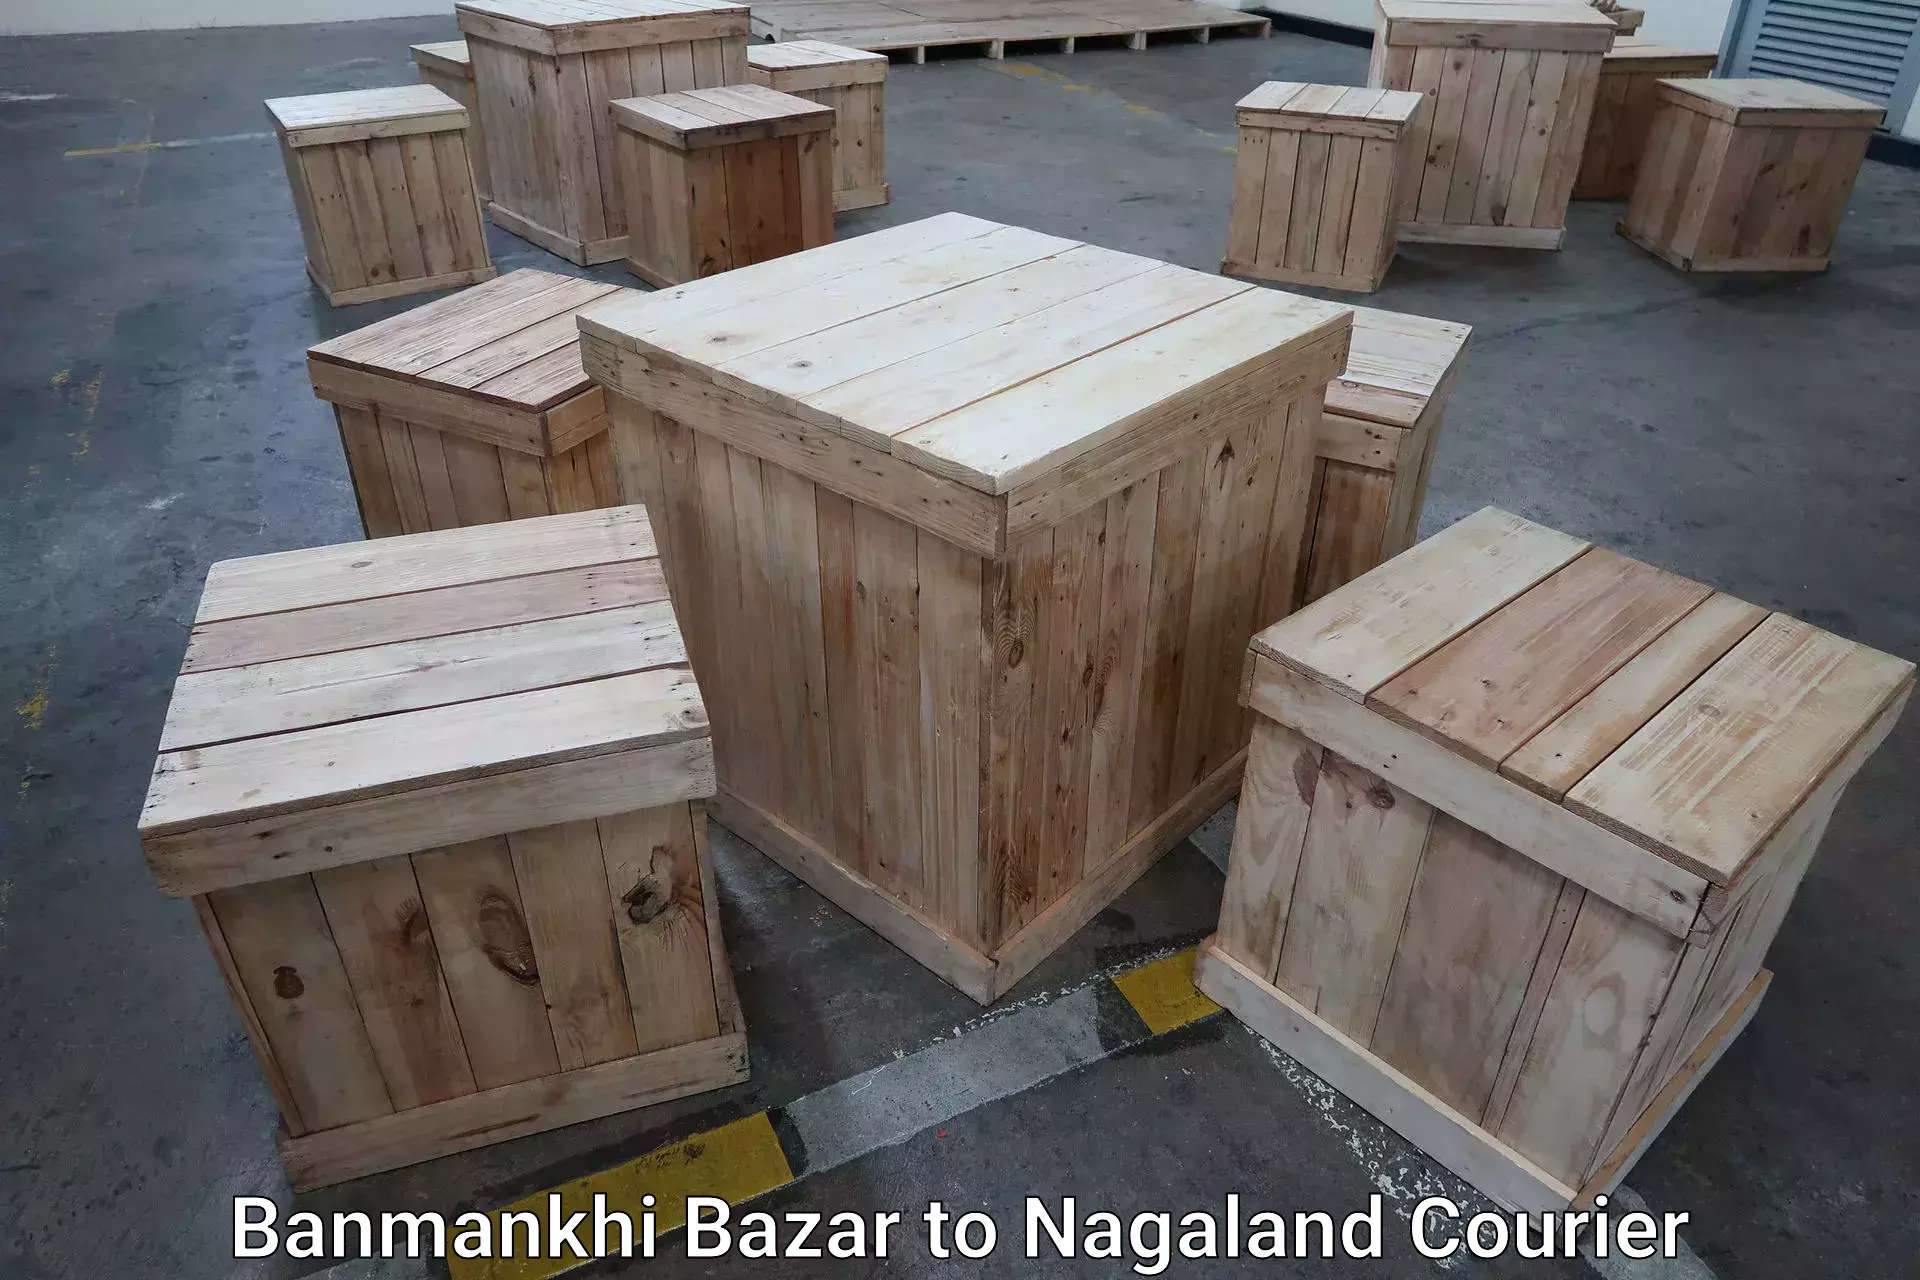 Luggage delivery operations Banmankhi Bazar to Nagaland